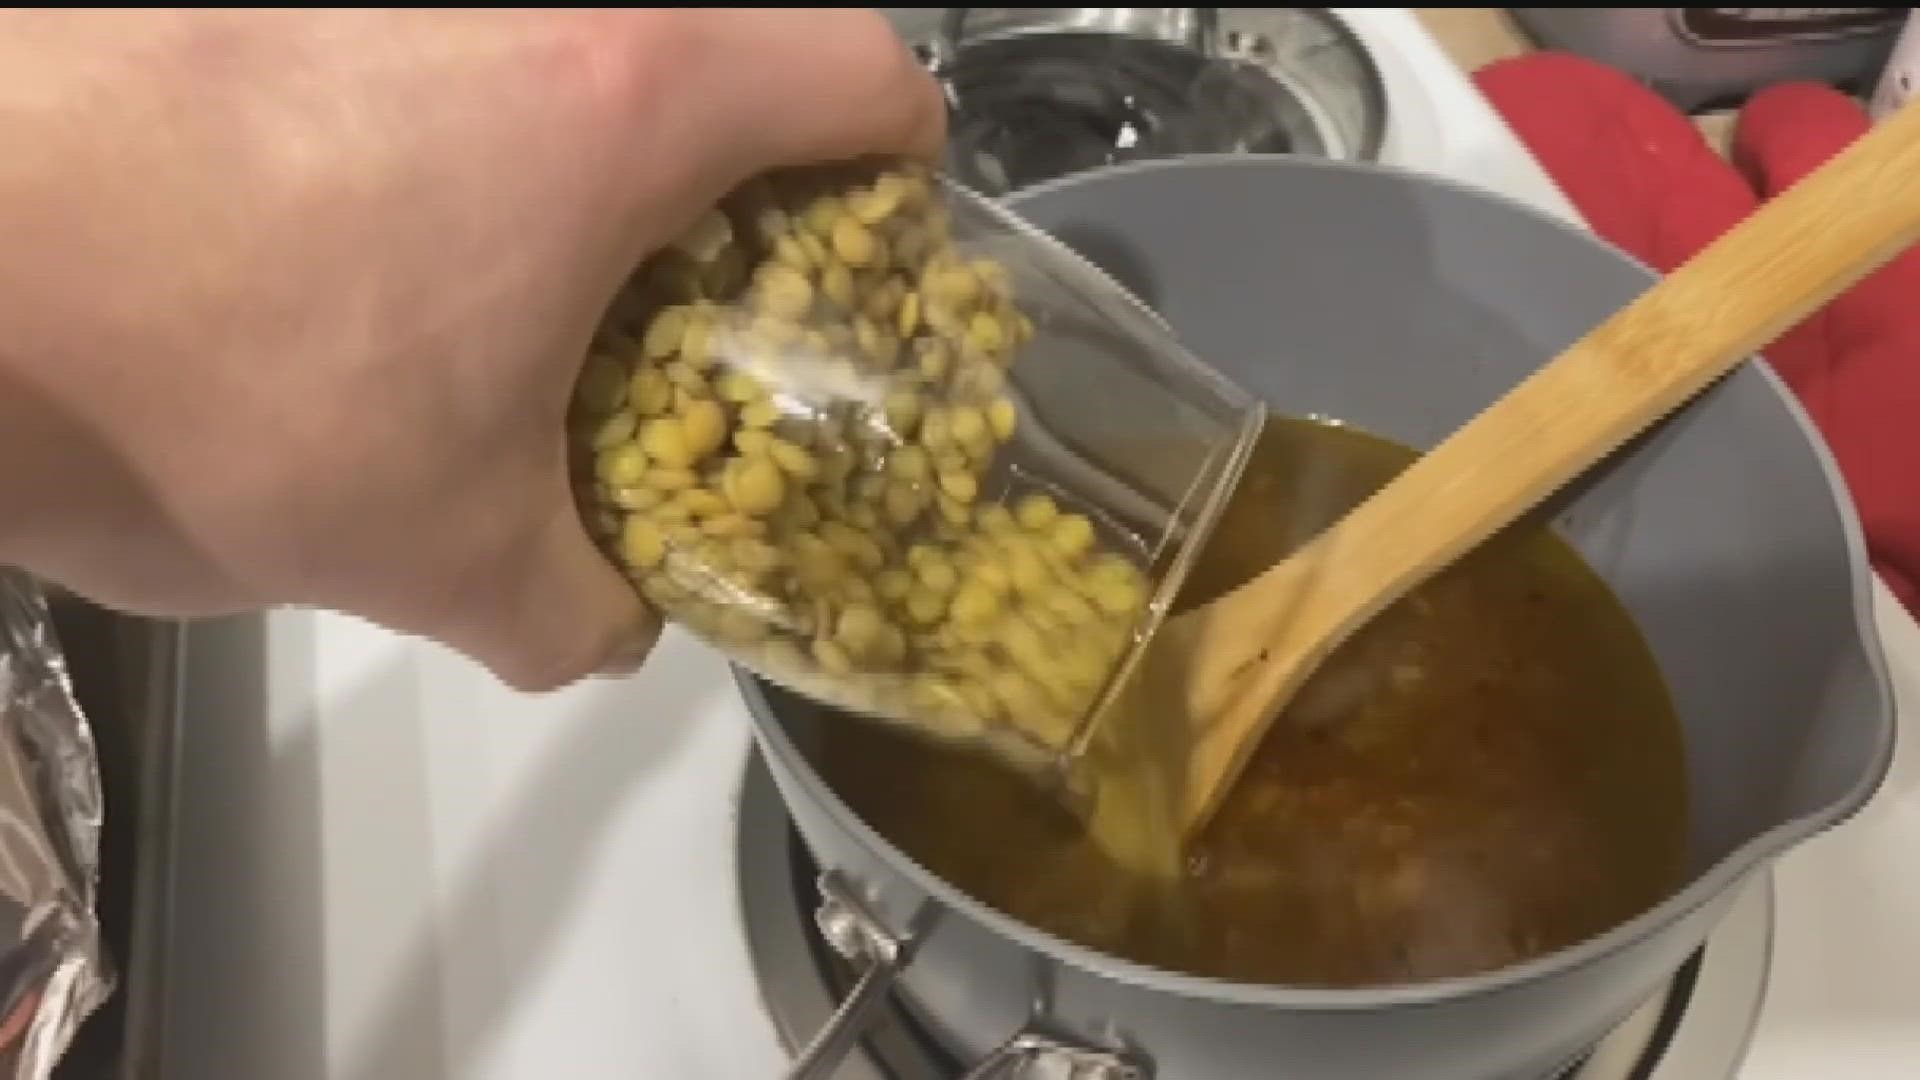 Doctors say soup is what you need when you're sick, so enjoy this recipe from producer Ben Pagani.